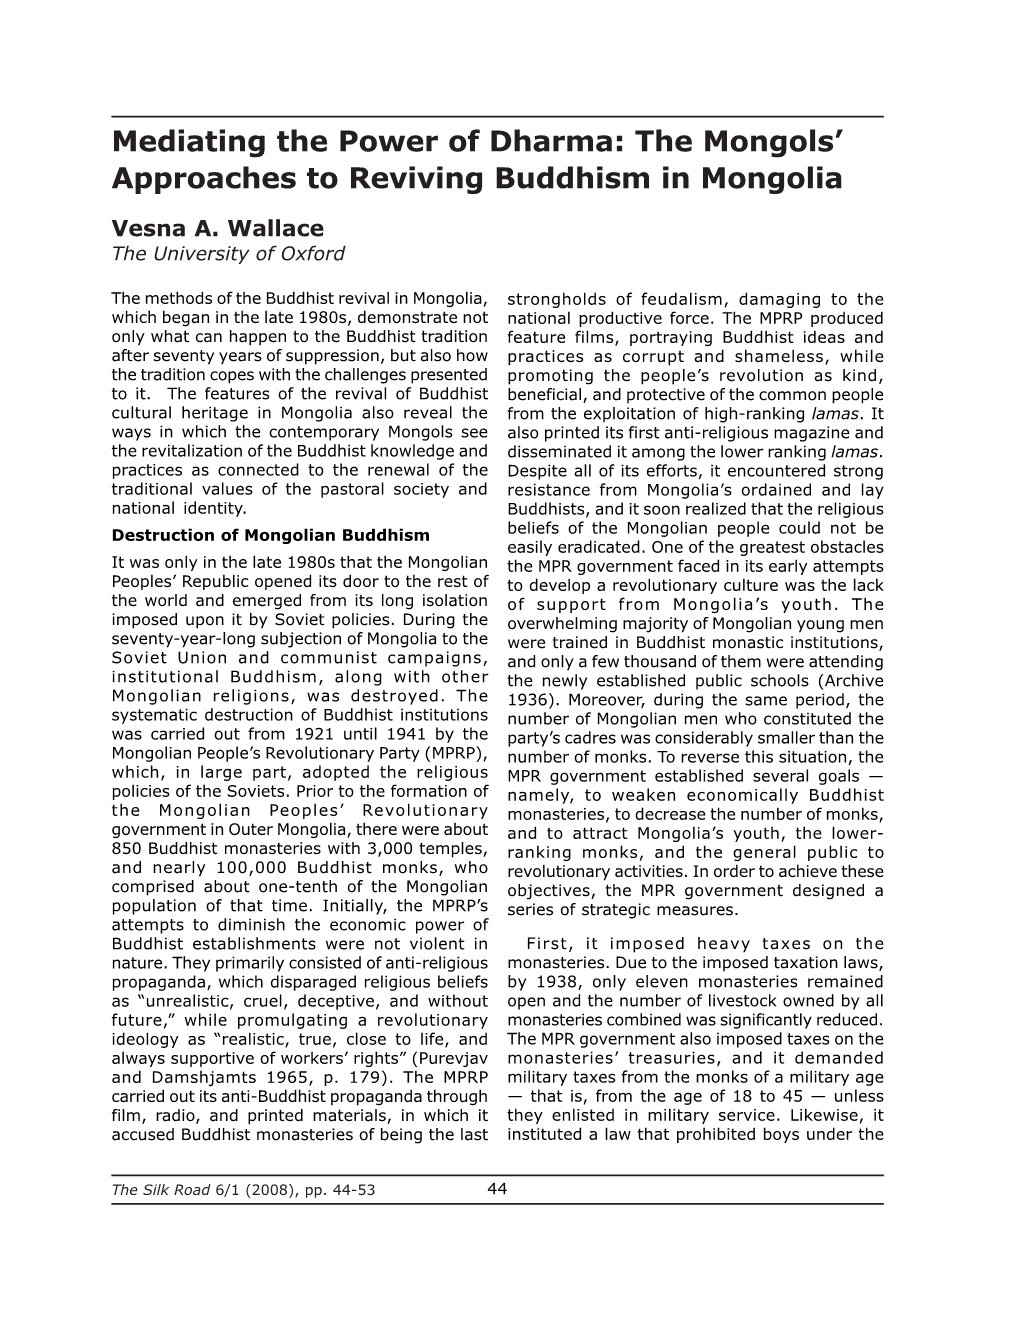 Mediating the Power of the Dharma: the Mongols